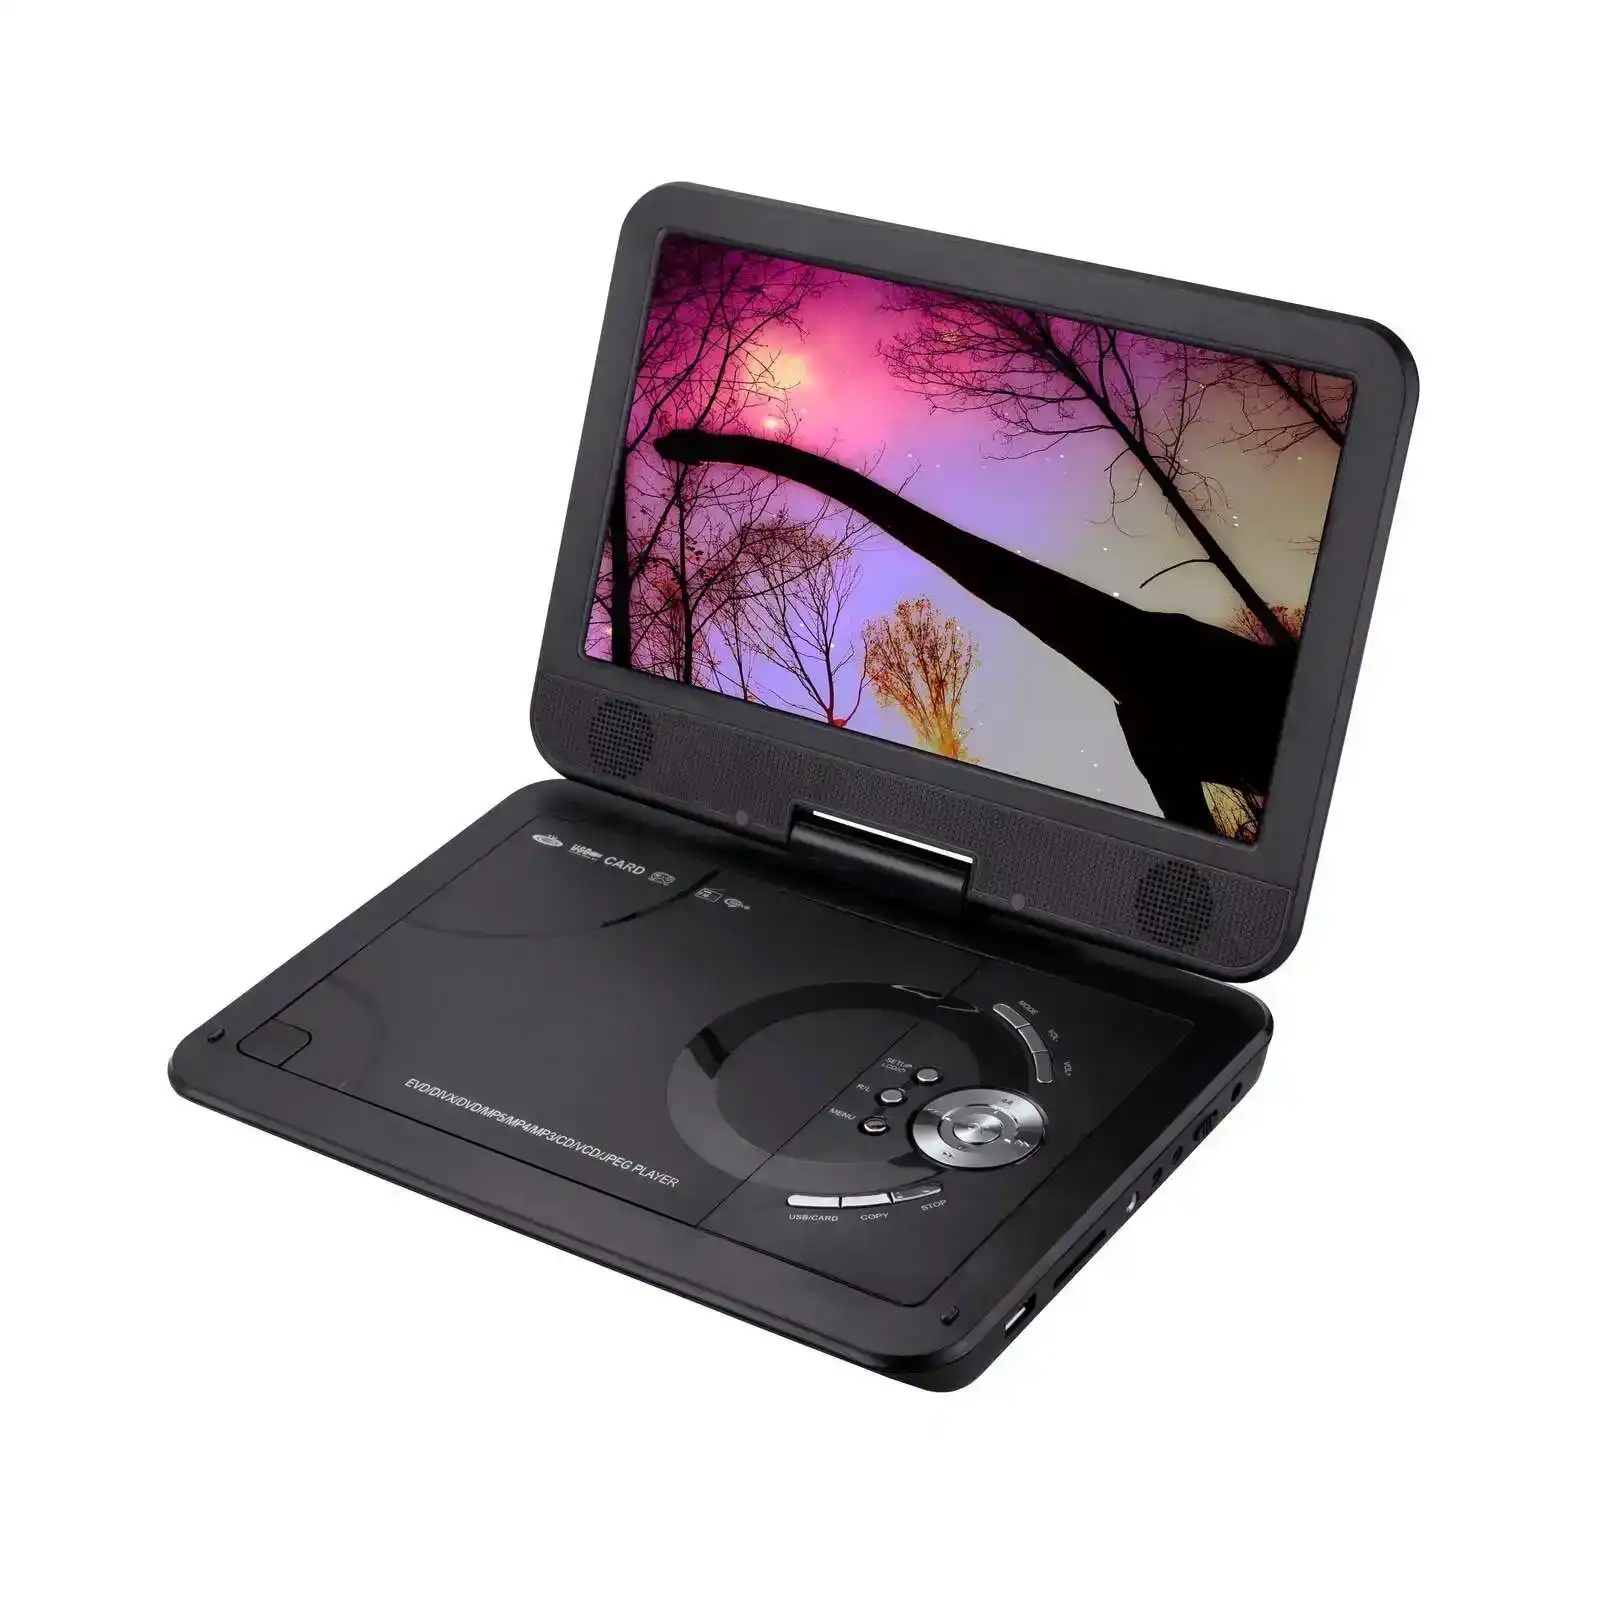 10.1" Portable Dvd Player - One Size